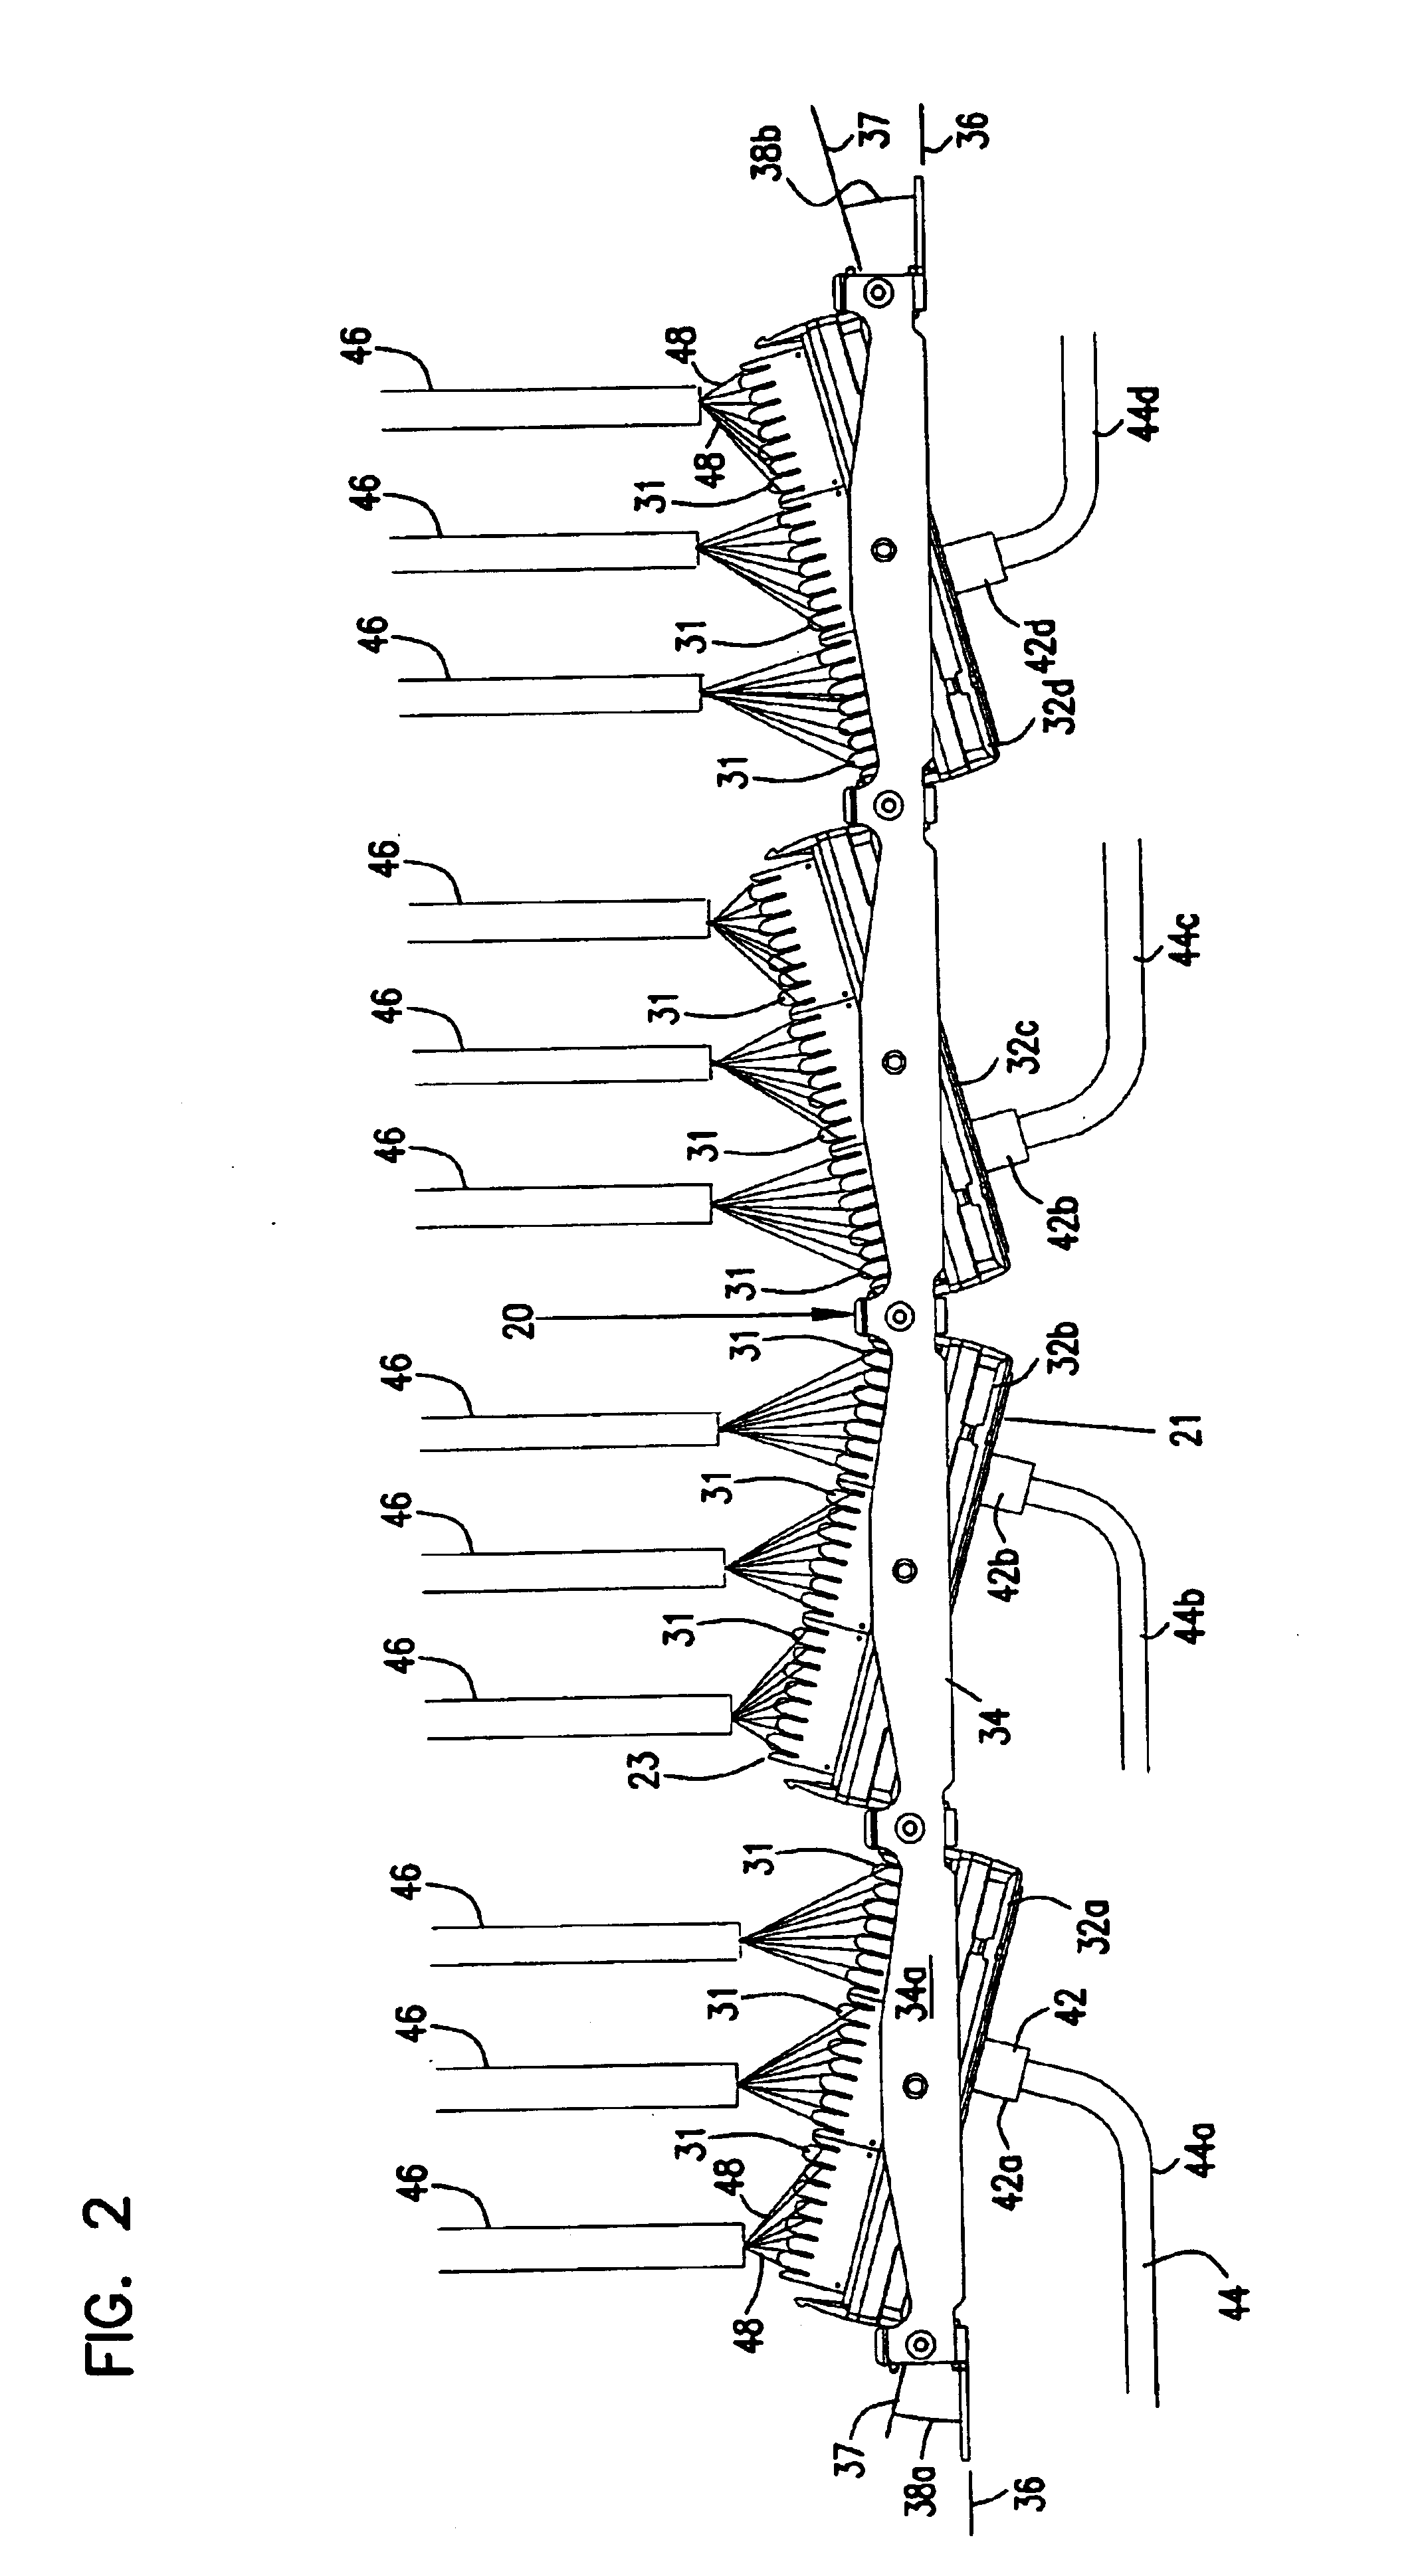 Telecommunications patch panel with angled connector modules